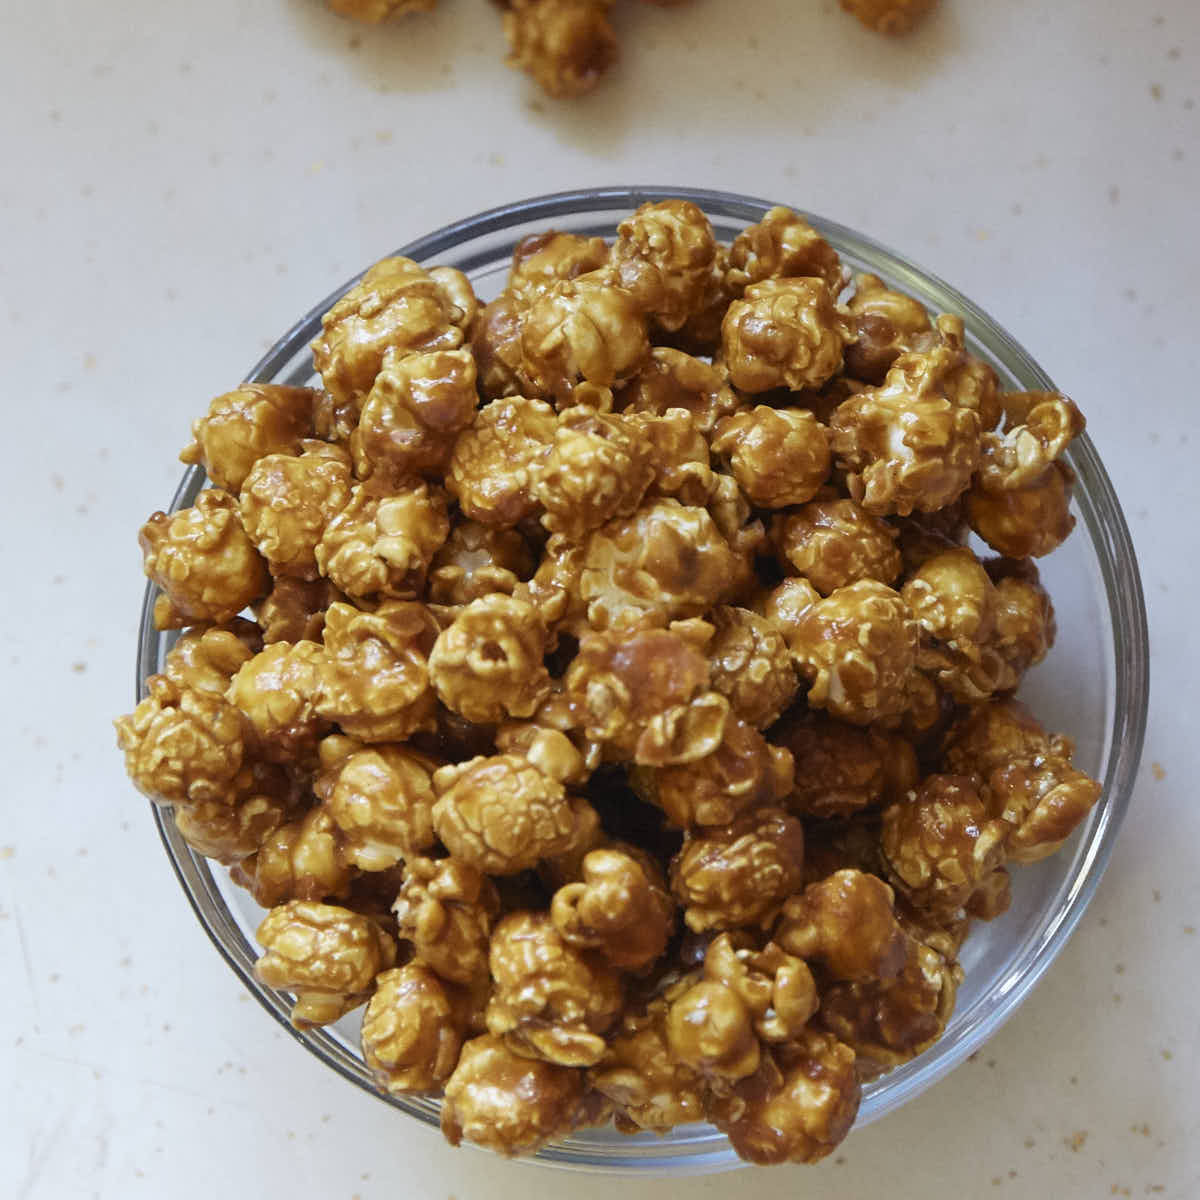 Caramel popcorn recipe that is so good and so easy that you will be making it over and over again. Warning: this caramel popcorn is very, very addictive.